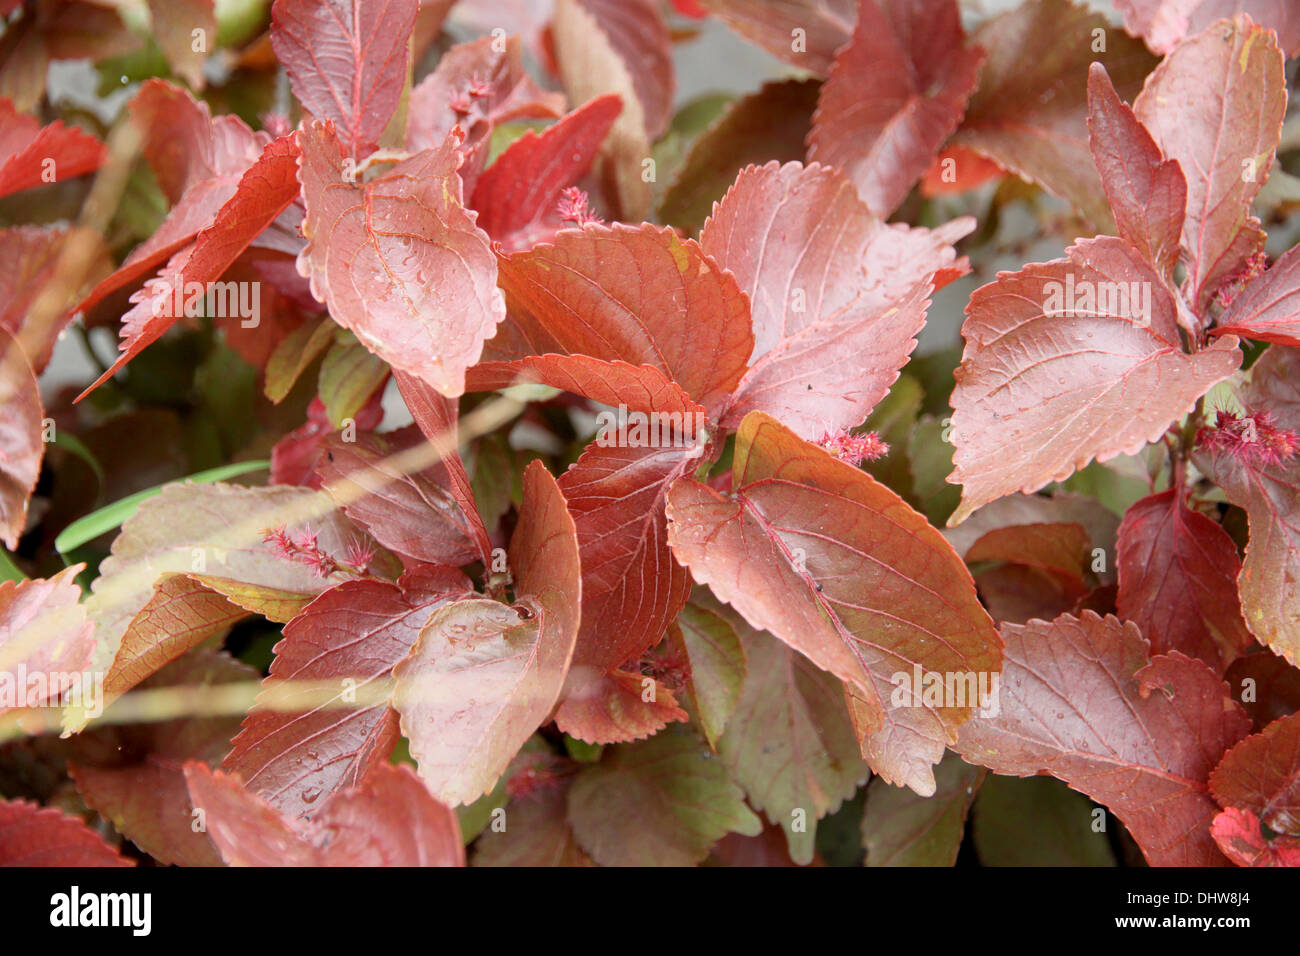 The Red leaves in the garden, it can be a beautiful background. Stock Photo